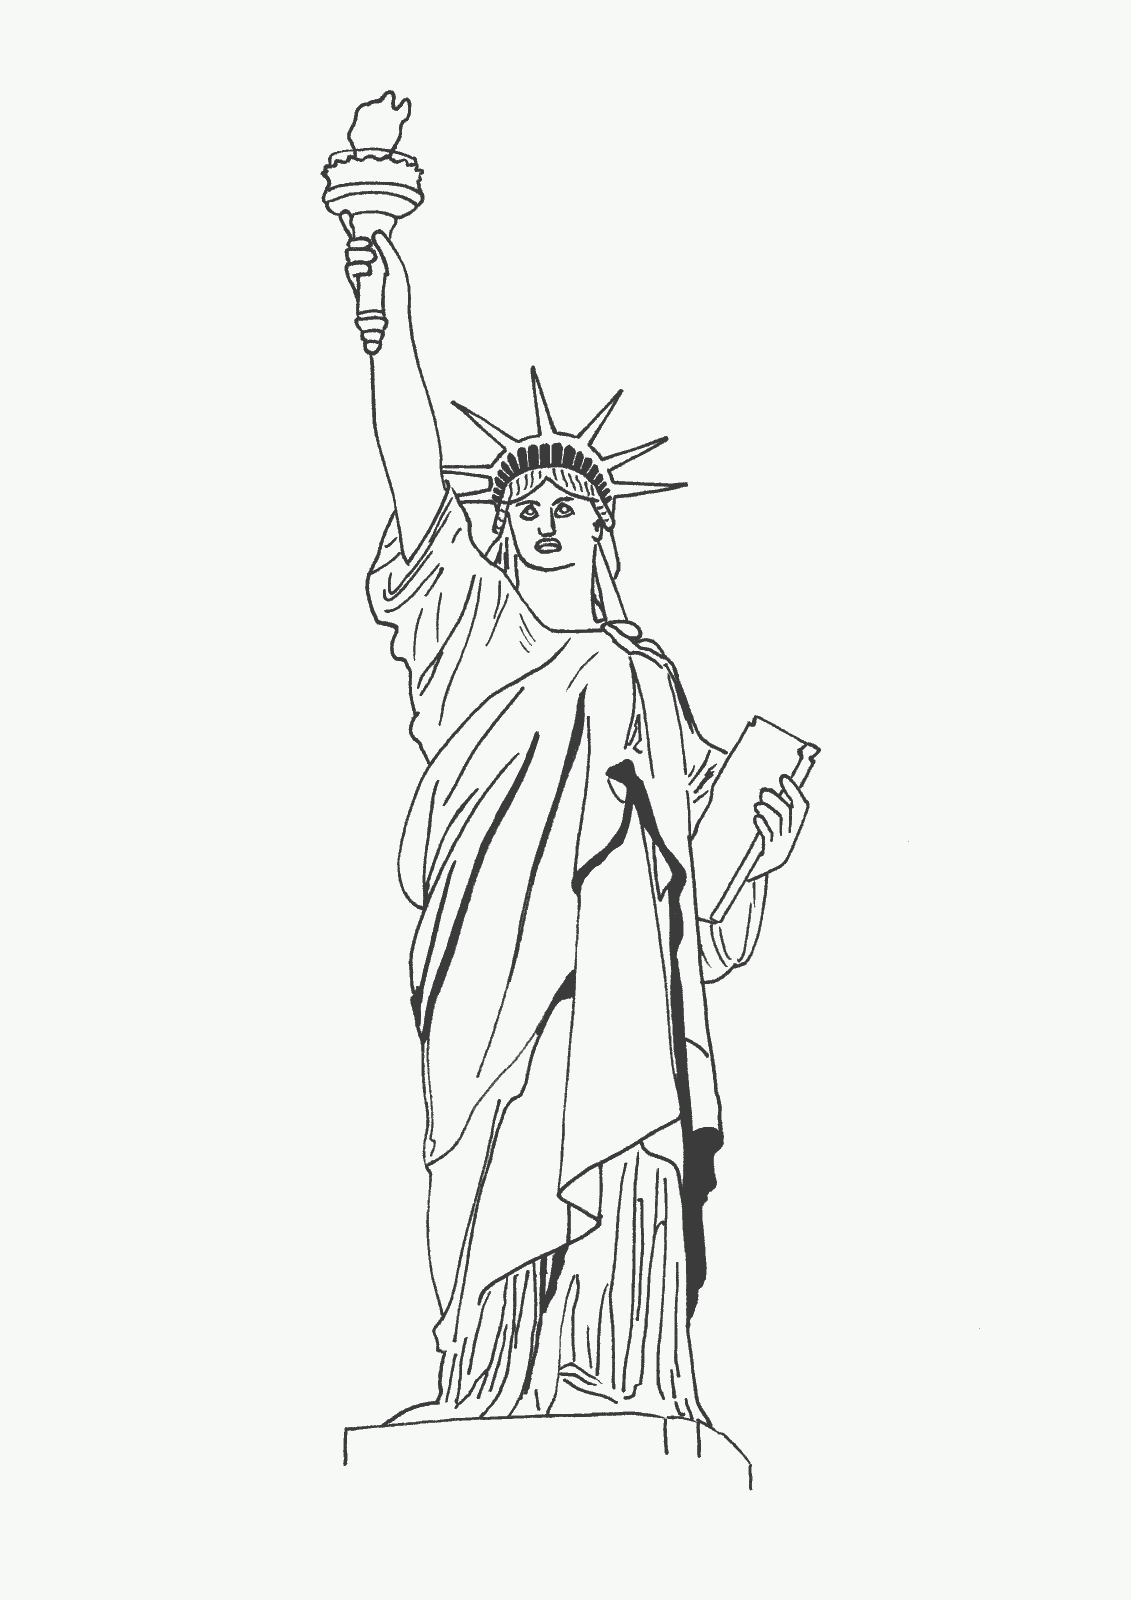 Free Statue Of Liberty Drawing Outline, Download Free Clip.